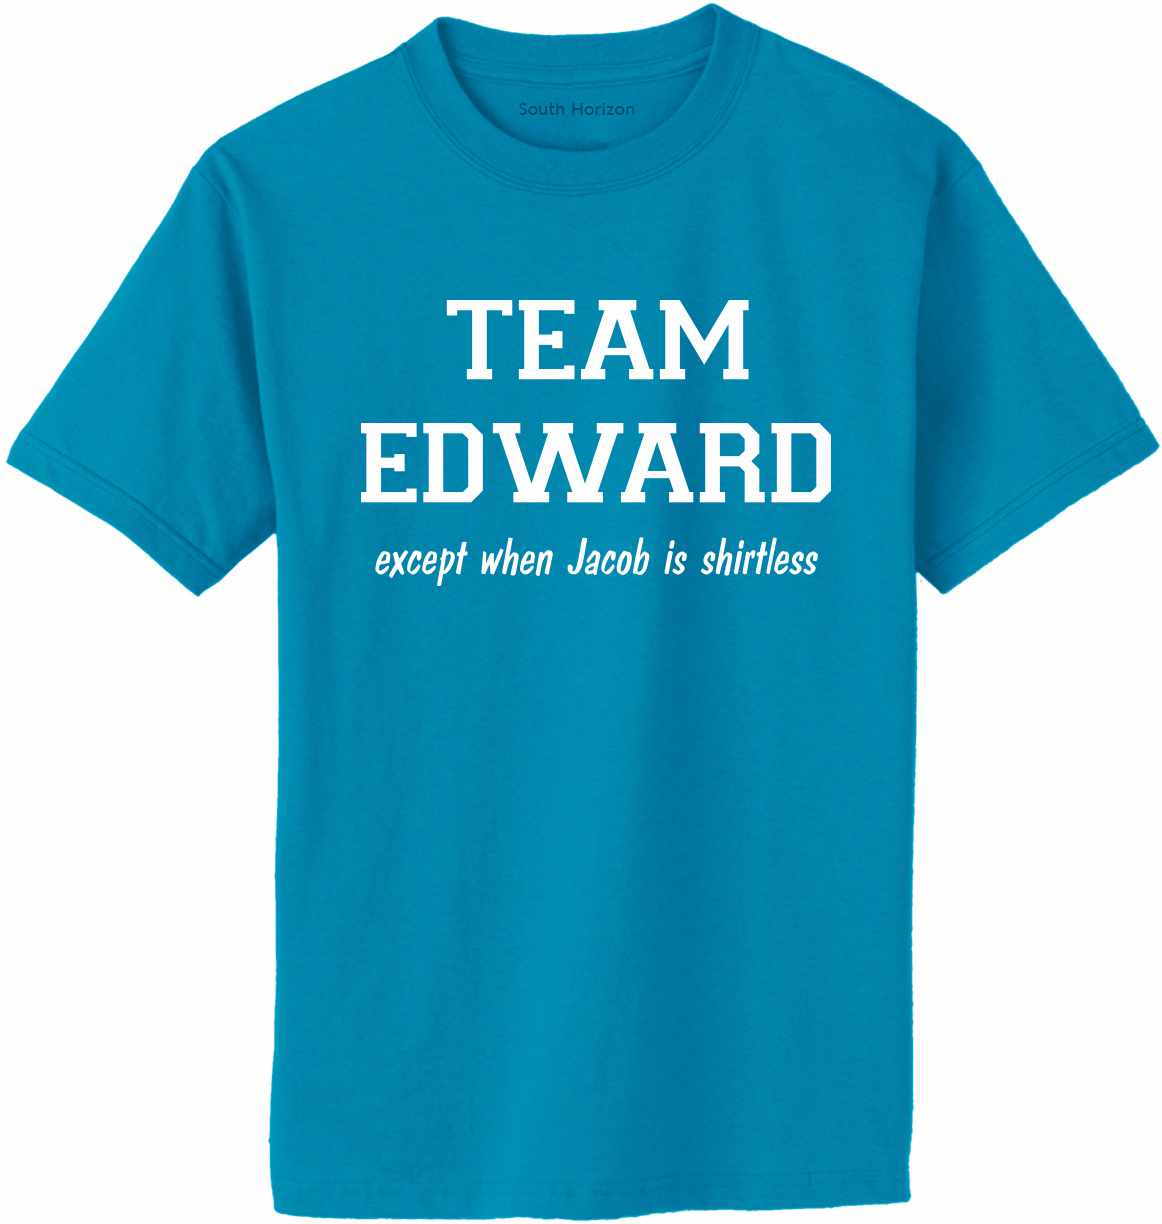 TEAM EDWARD Except when Jacob is Shirtless Adult T-Shirt (#509-1)